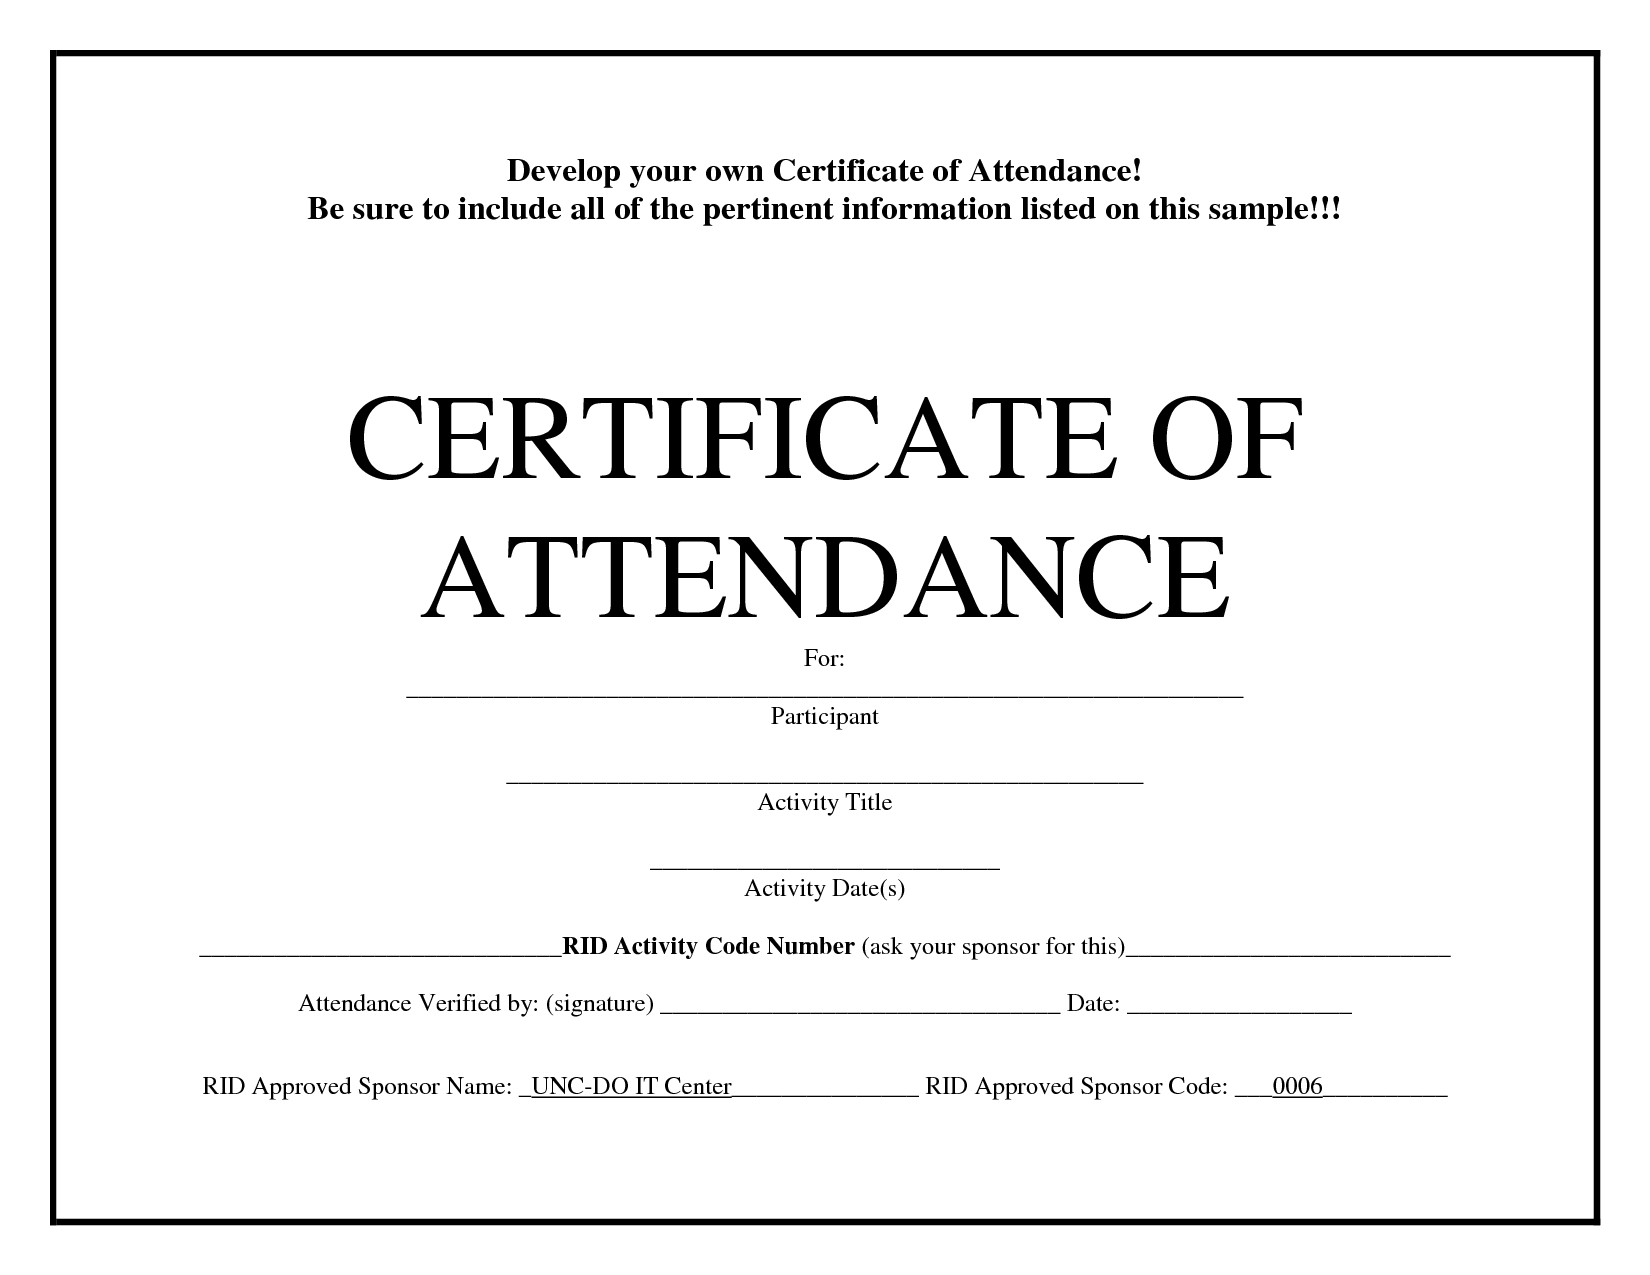 Certificate Of Attendance Template Word Free - Calep Intended For Certificate Of Attendance Conference Template